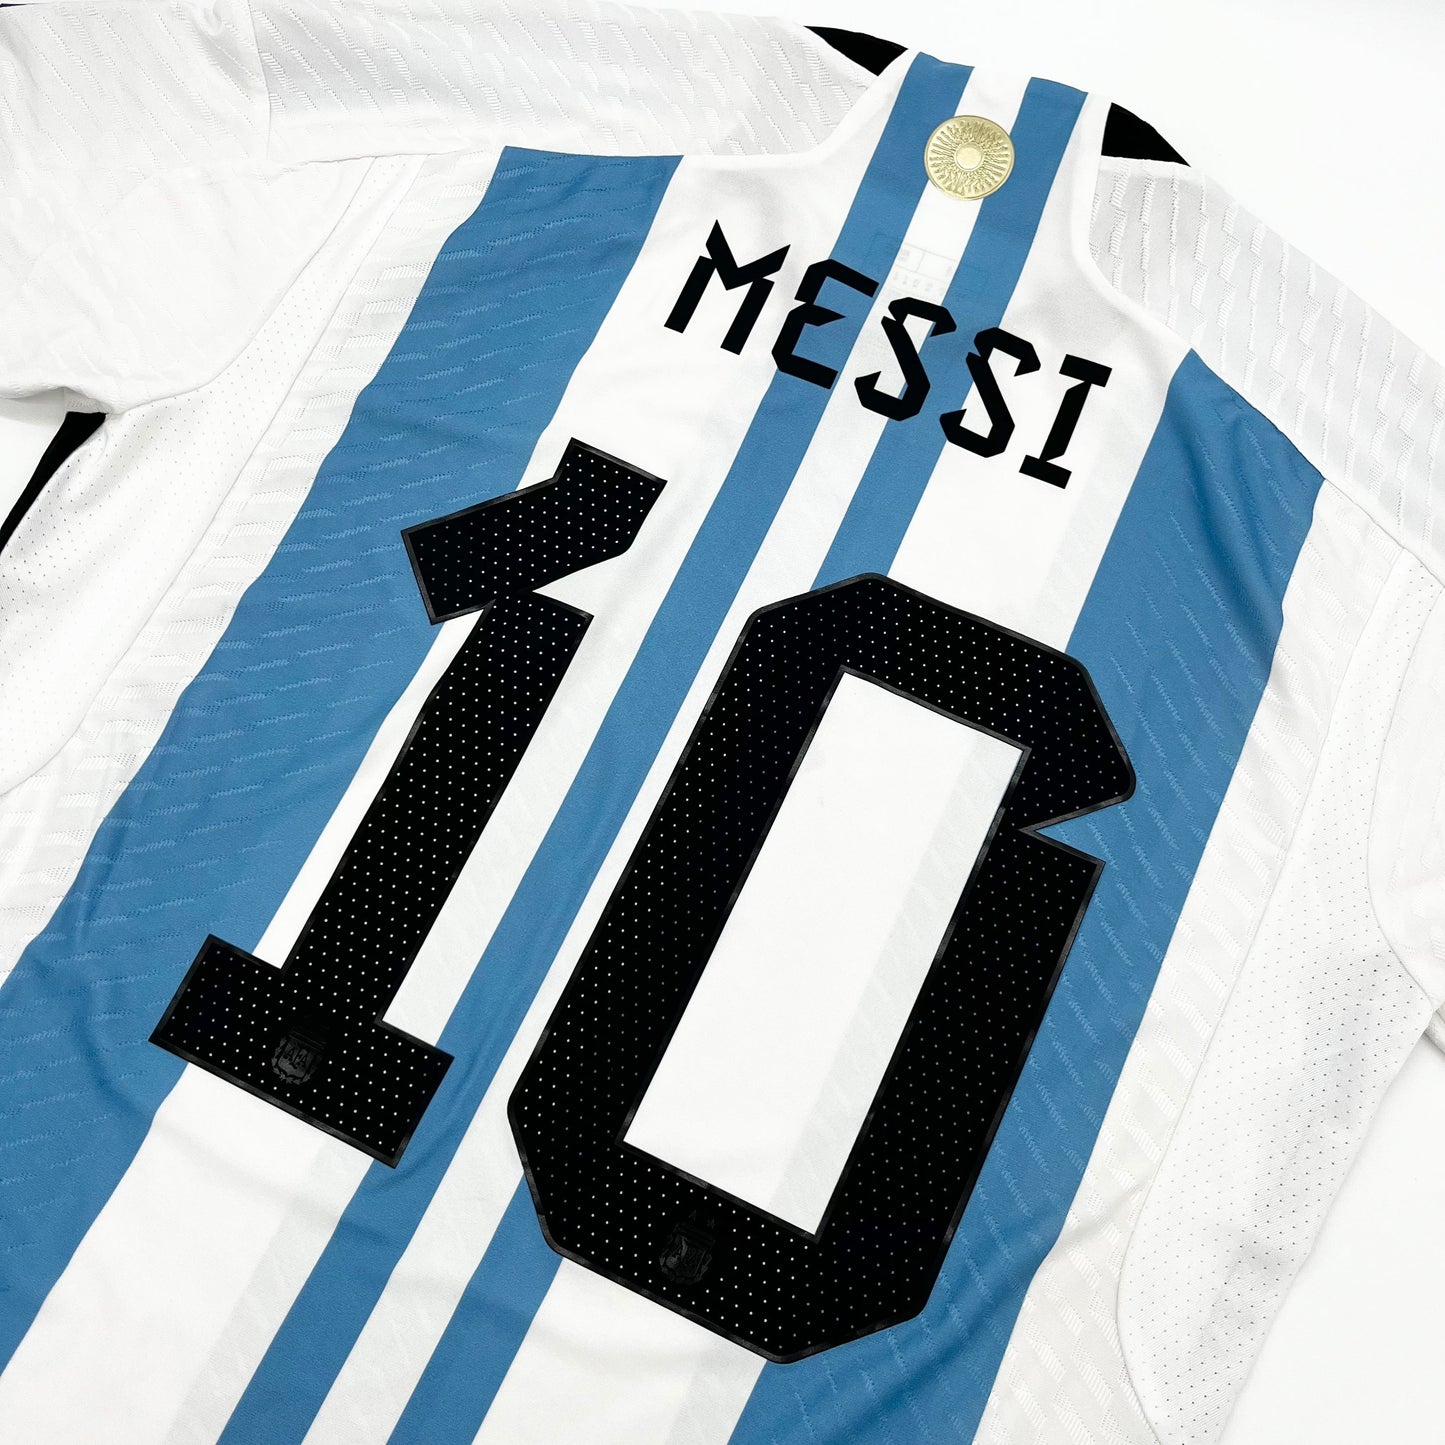 Lionel Messi Match Issued Adidas HEAT.RDY Shirt Argentina vs Mexico 2022 FIFA World Cup